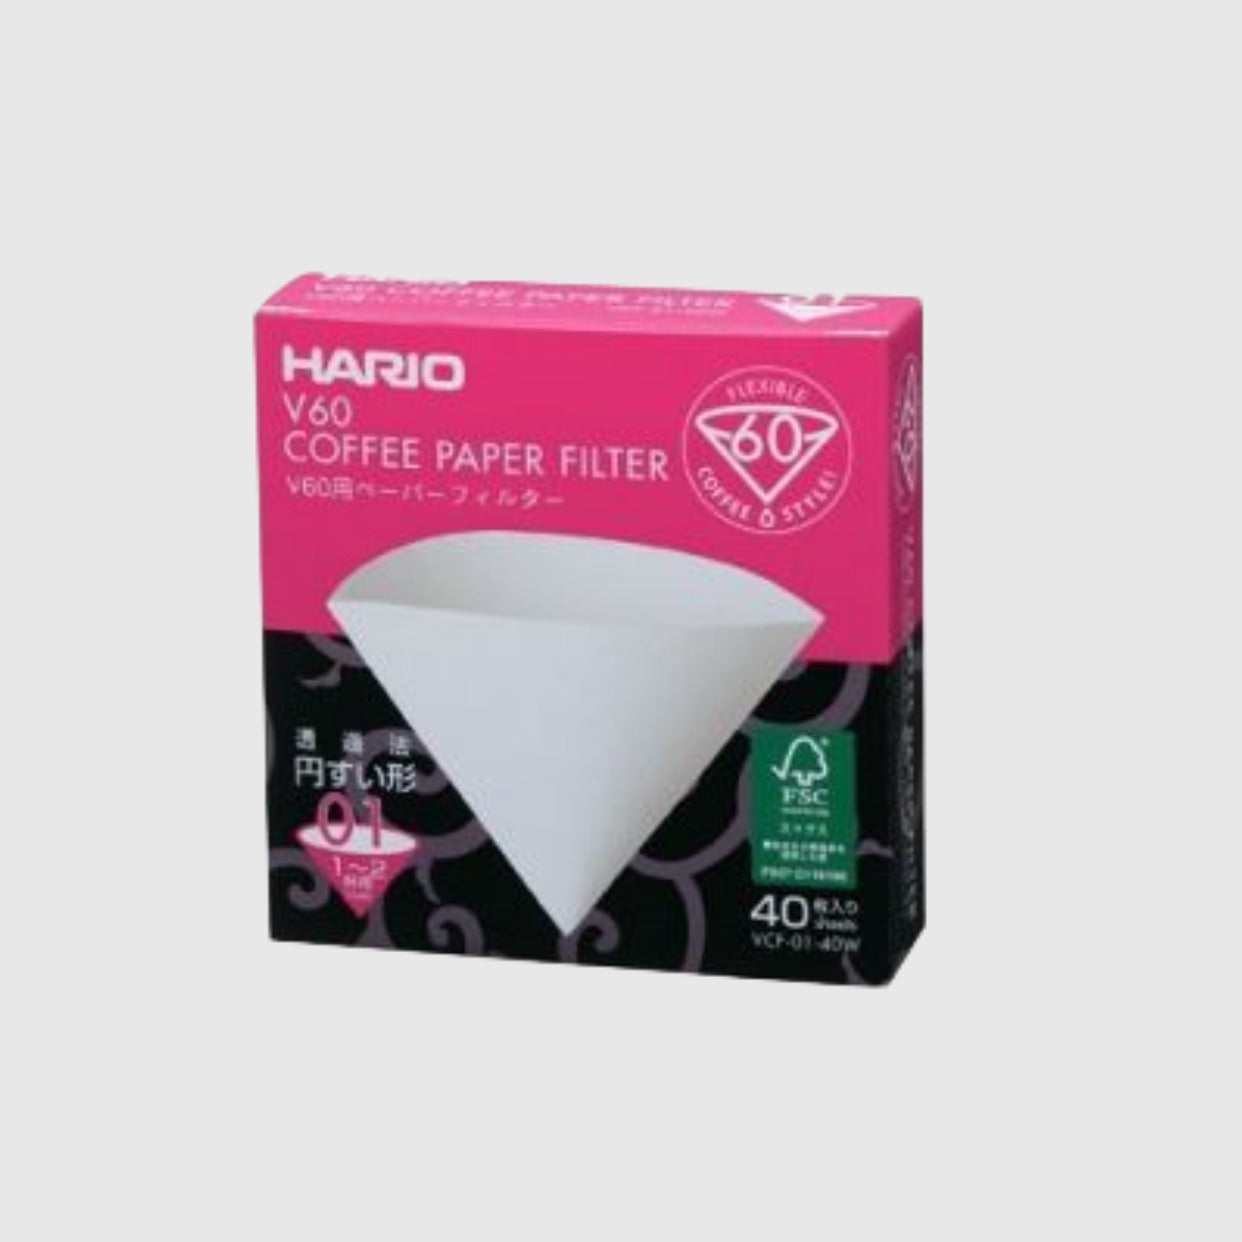 Hario V60 02 40pk 40 packet size Paper Filter Papers Basic Barista Hario V60 02 40pk 40 packet size Paper Filter Papers Basic Barista Australia Melbourne Coffee Gear Brewing Conical dripper coffee filter paper coffee filter paper filters Basic Barista Pour over coffee